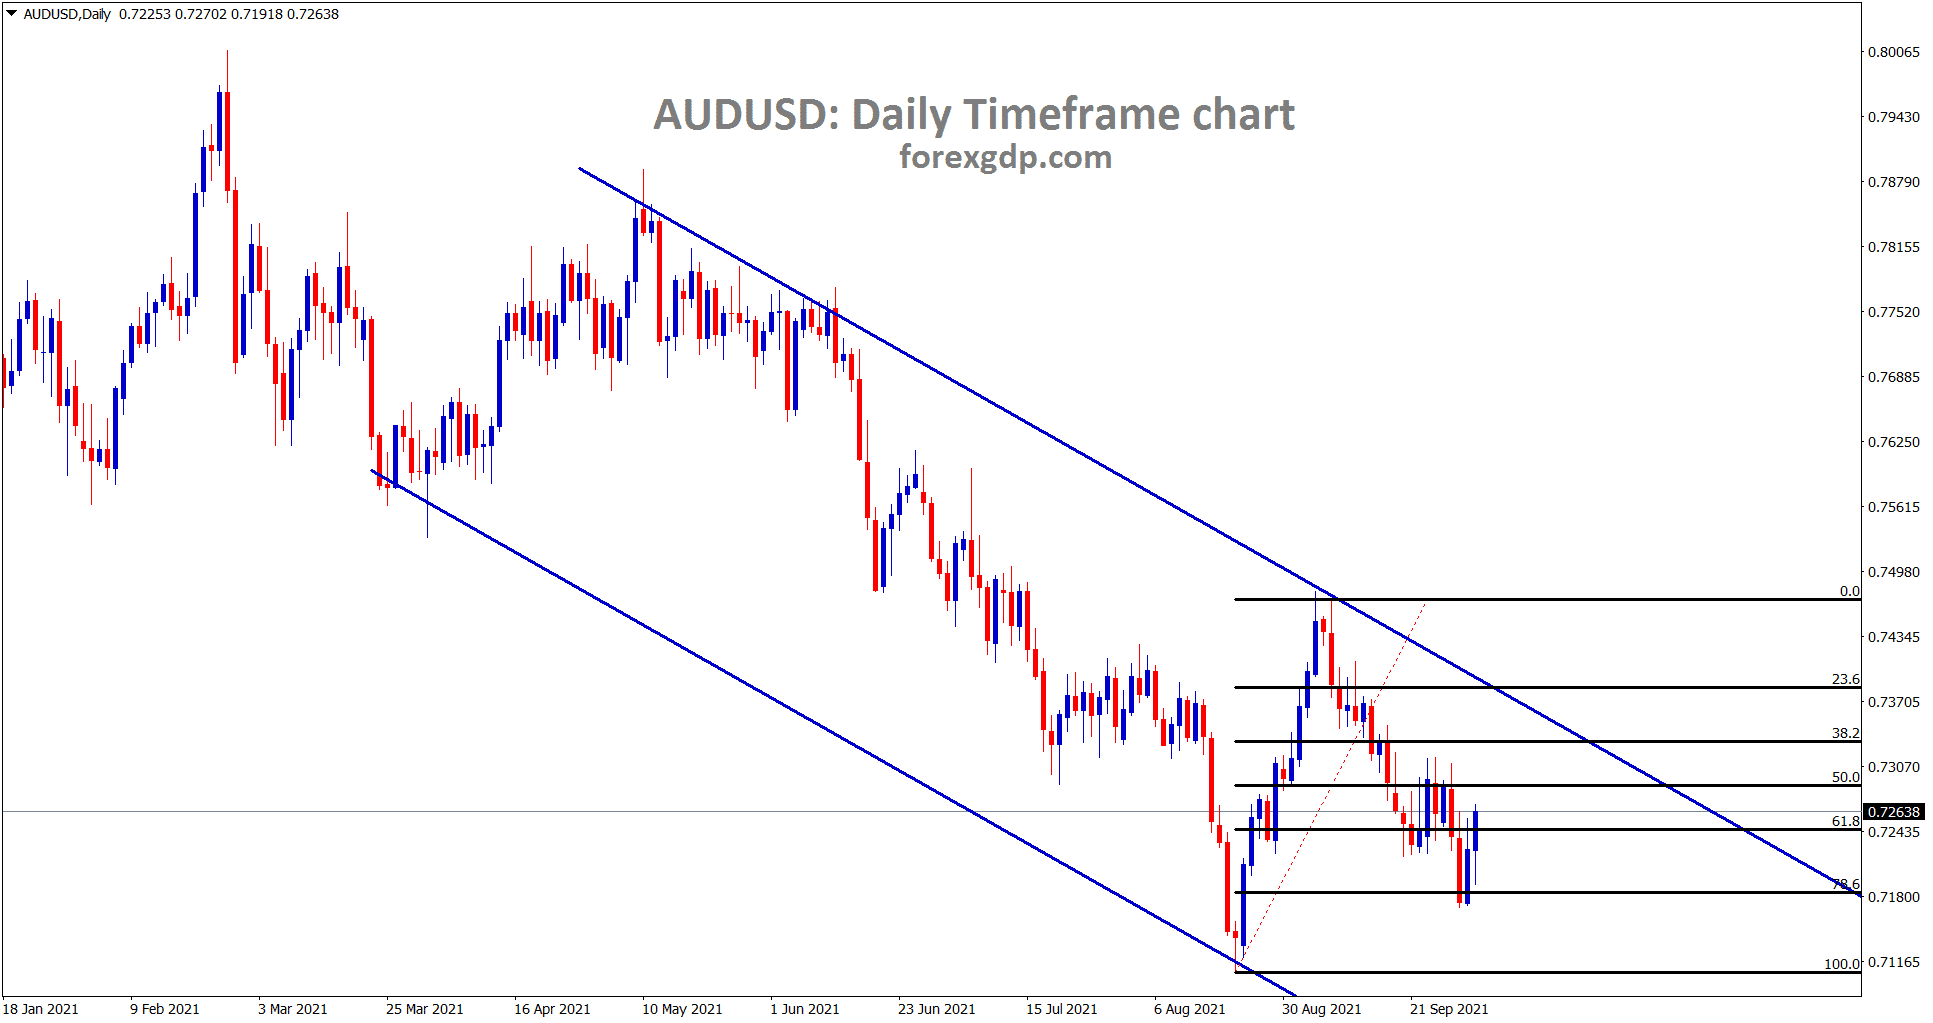 AUDUSD is moving in a descending channel and it has made a retracement of 78